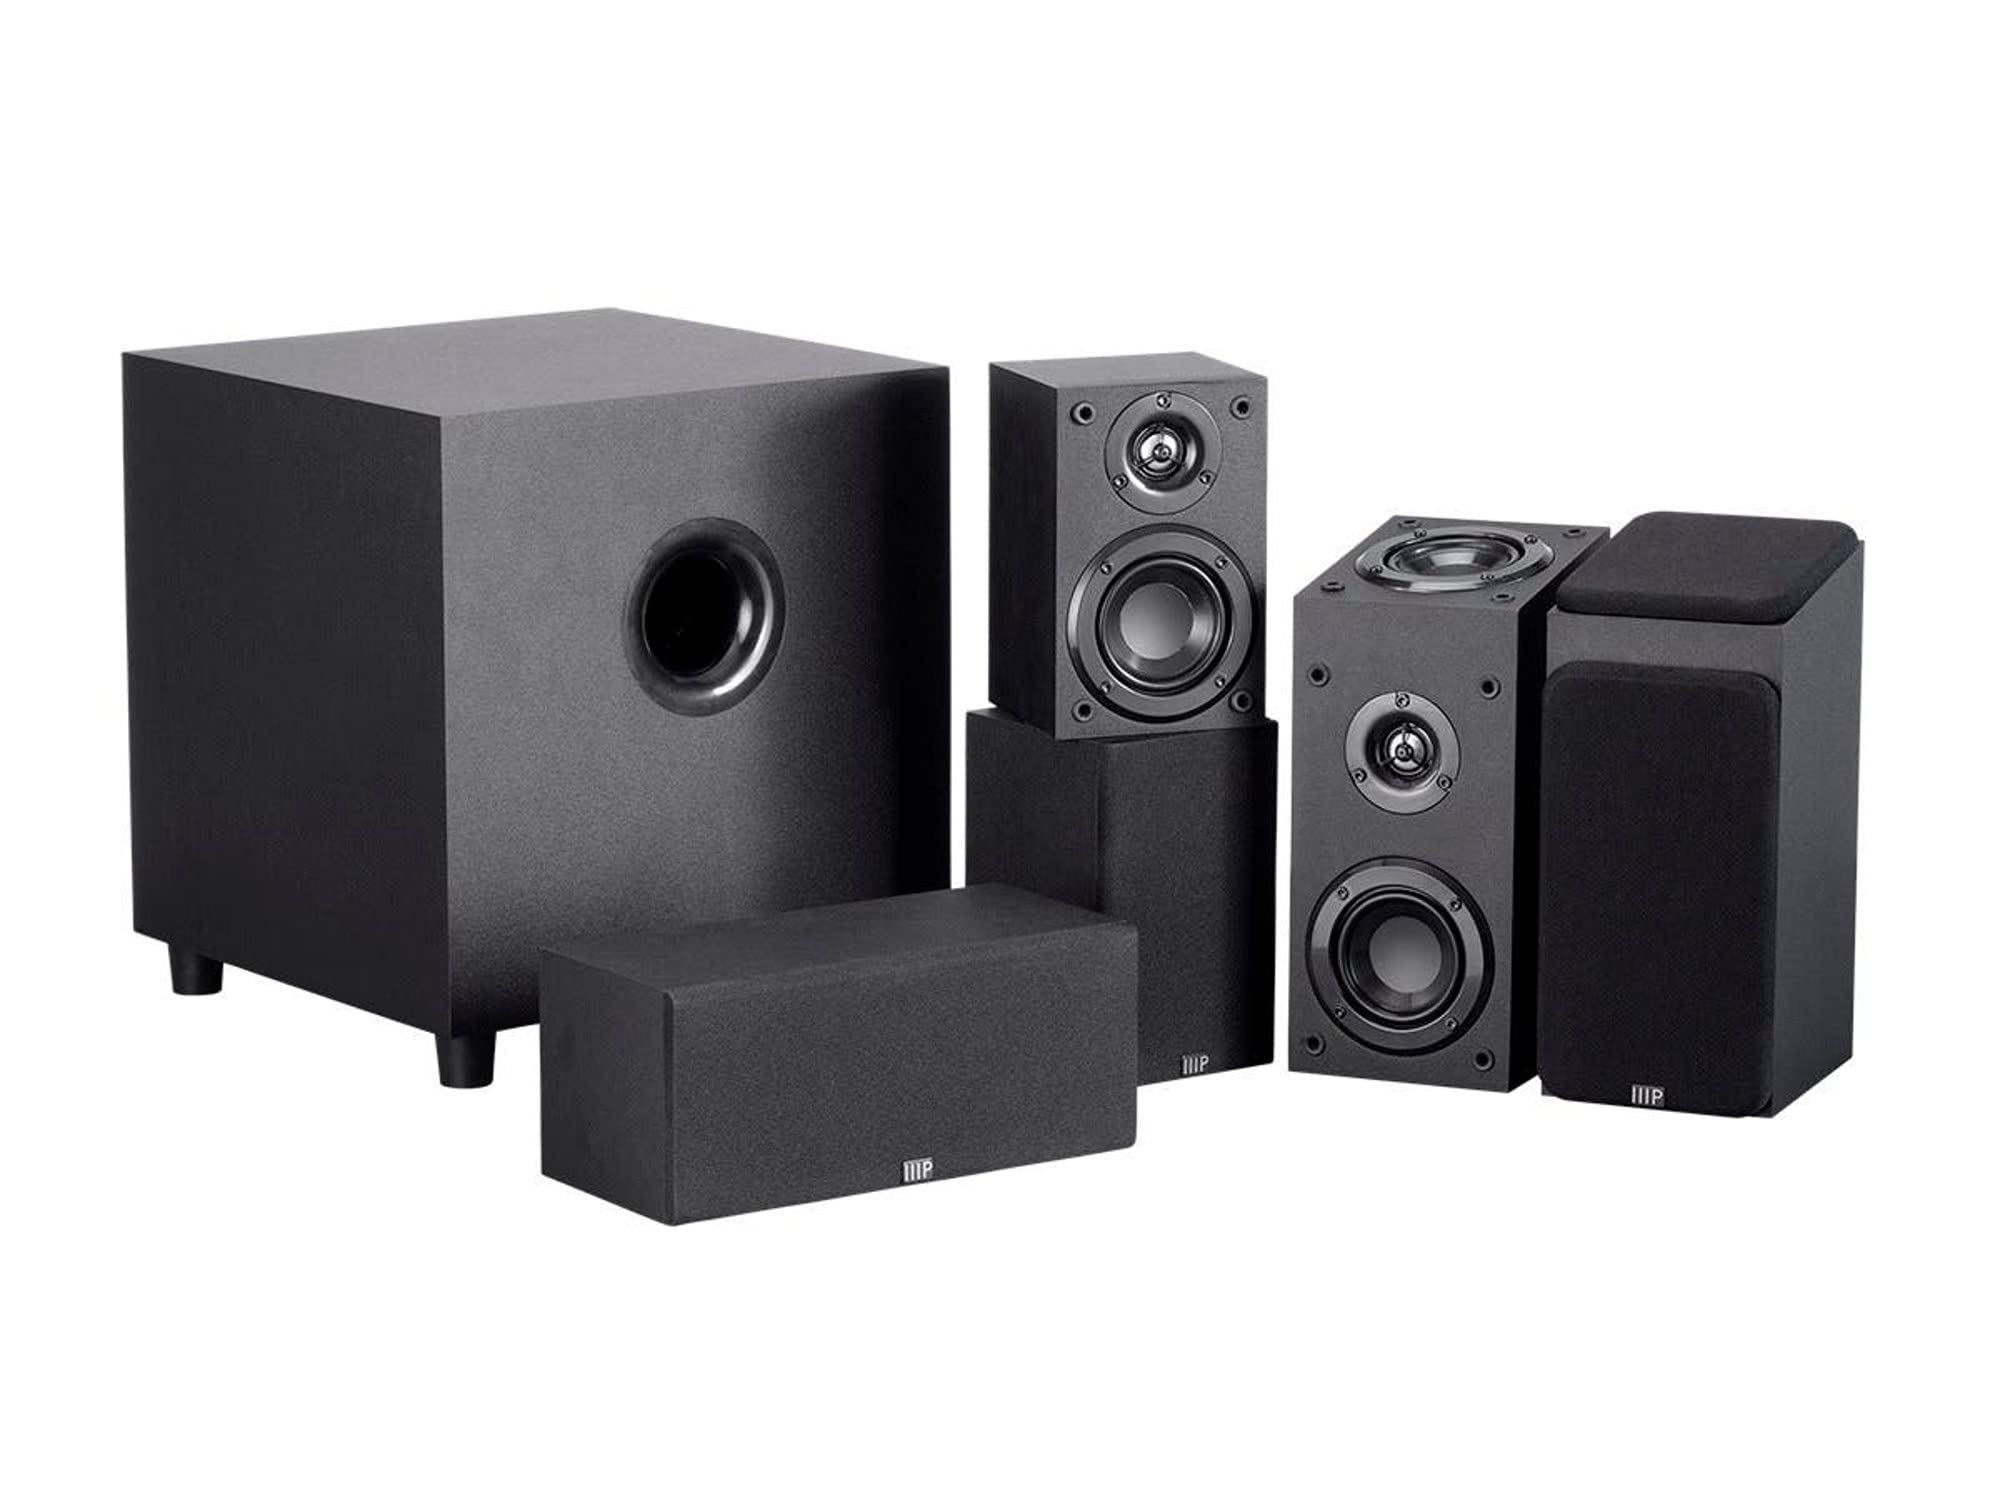 Monoprice 133831 Premium 5.1.2-Ch. Immersive Home Theater System - Black With 8 Inch 200 Watt Subwoofer